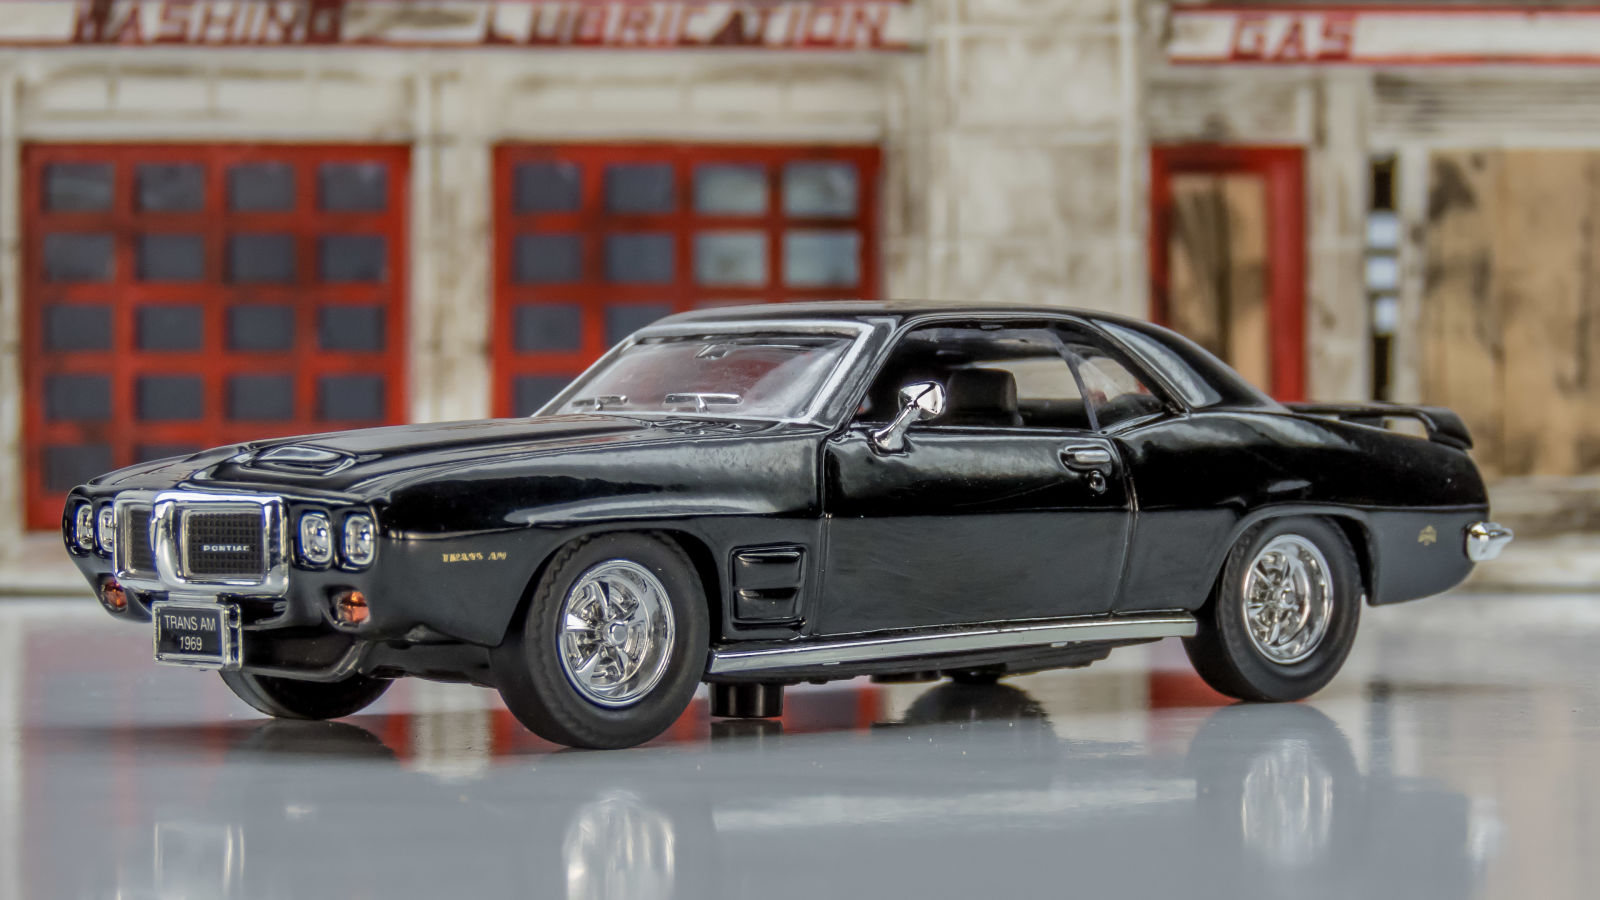 Illustration for article titled Video Review: Affordable 1:43 Scale? Check out the Yat Ming 69 Pontiac Firebird T/A